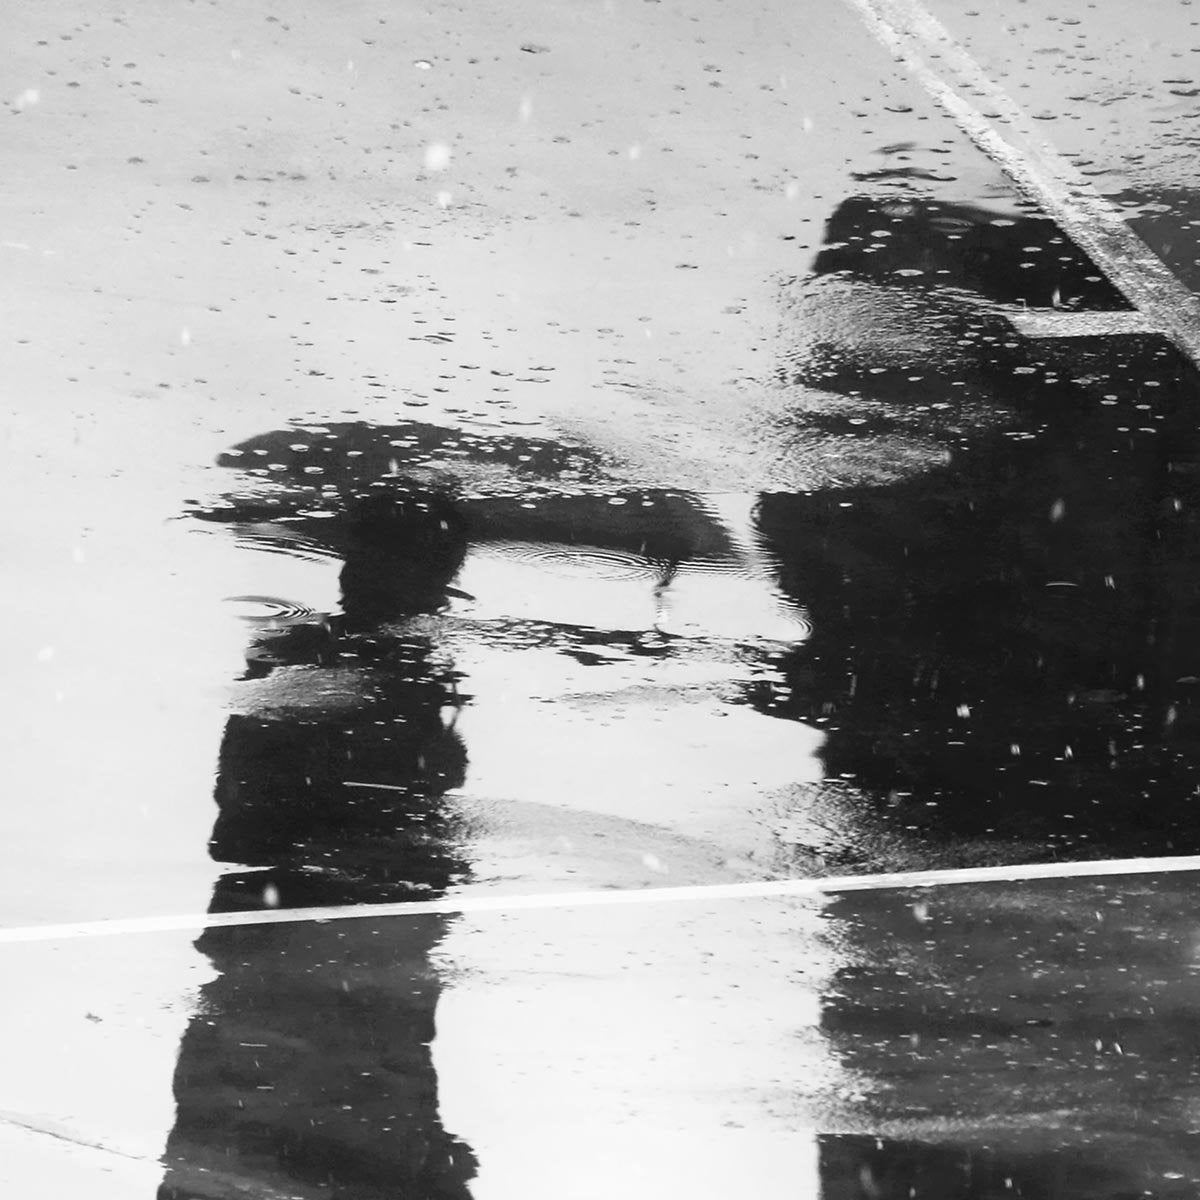 Man's Reflection on a Wet Street